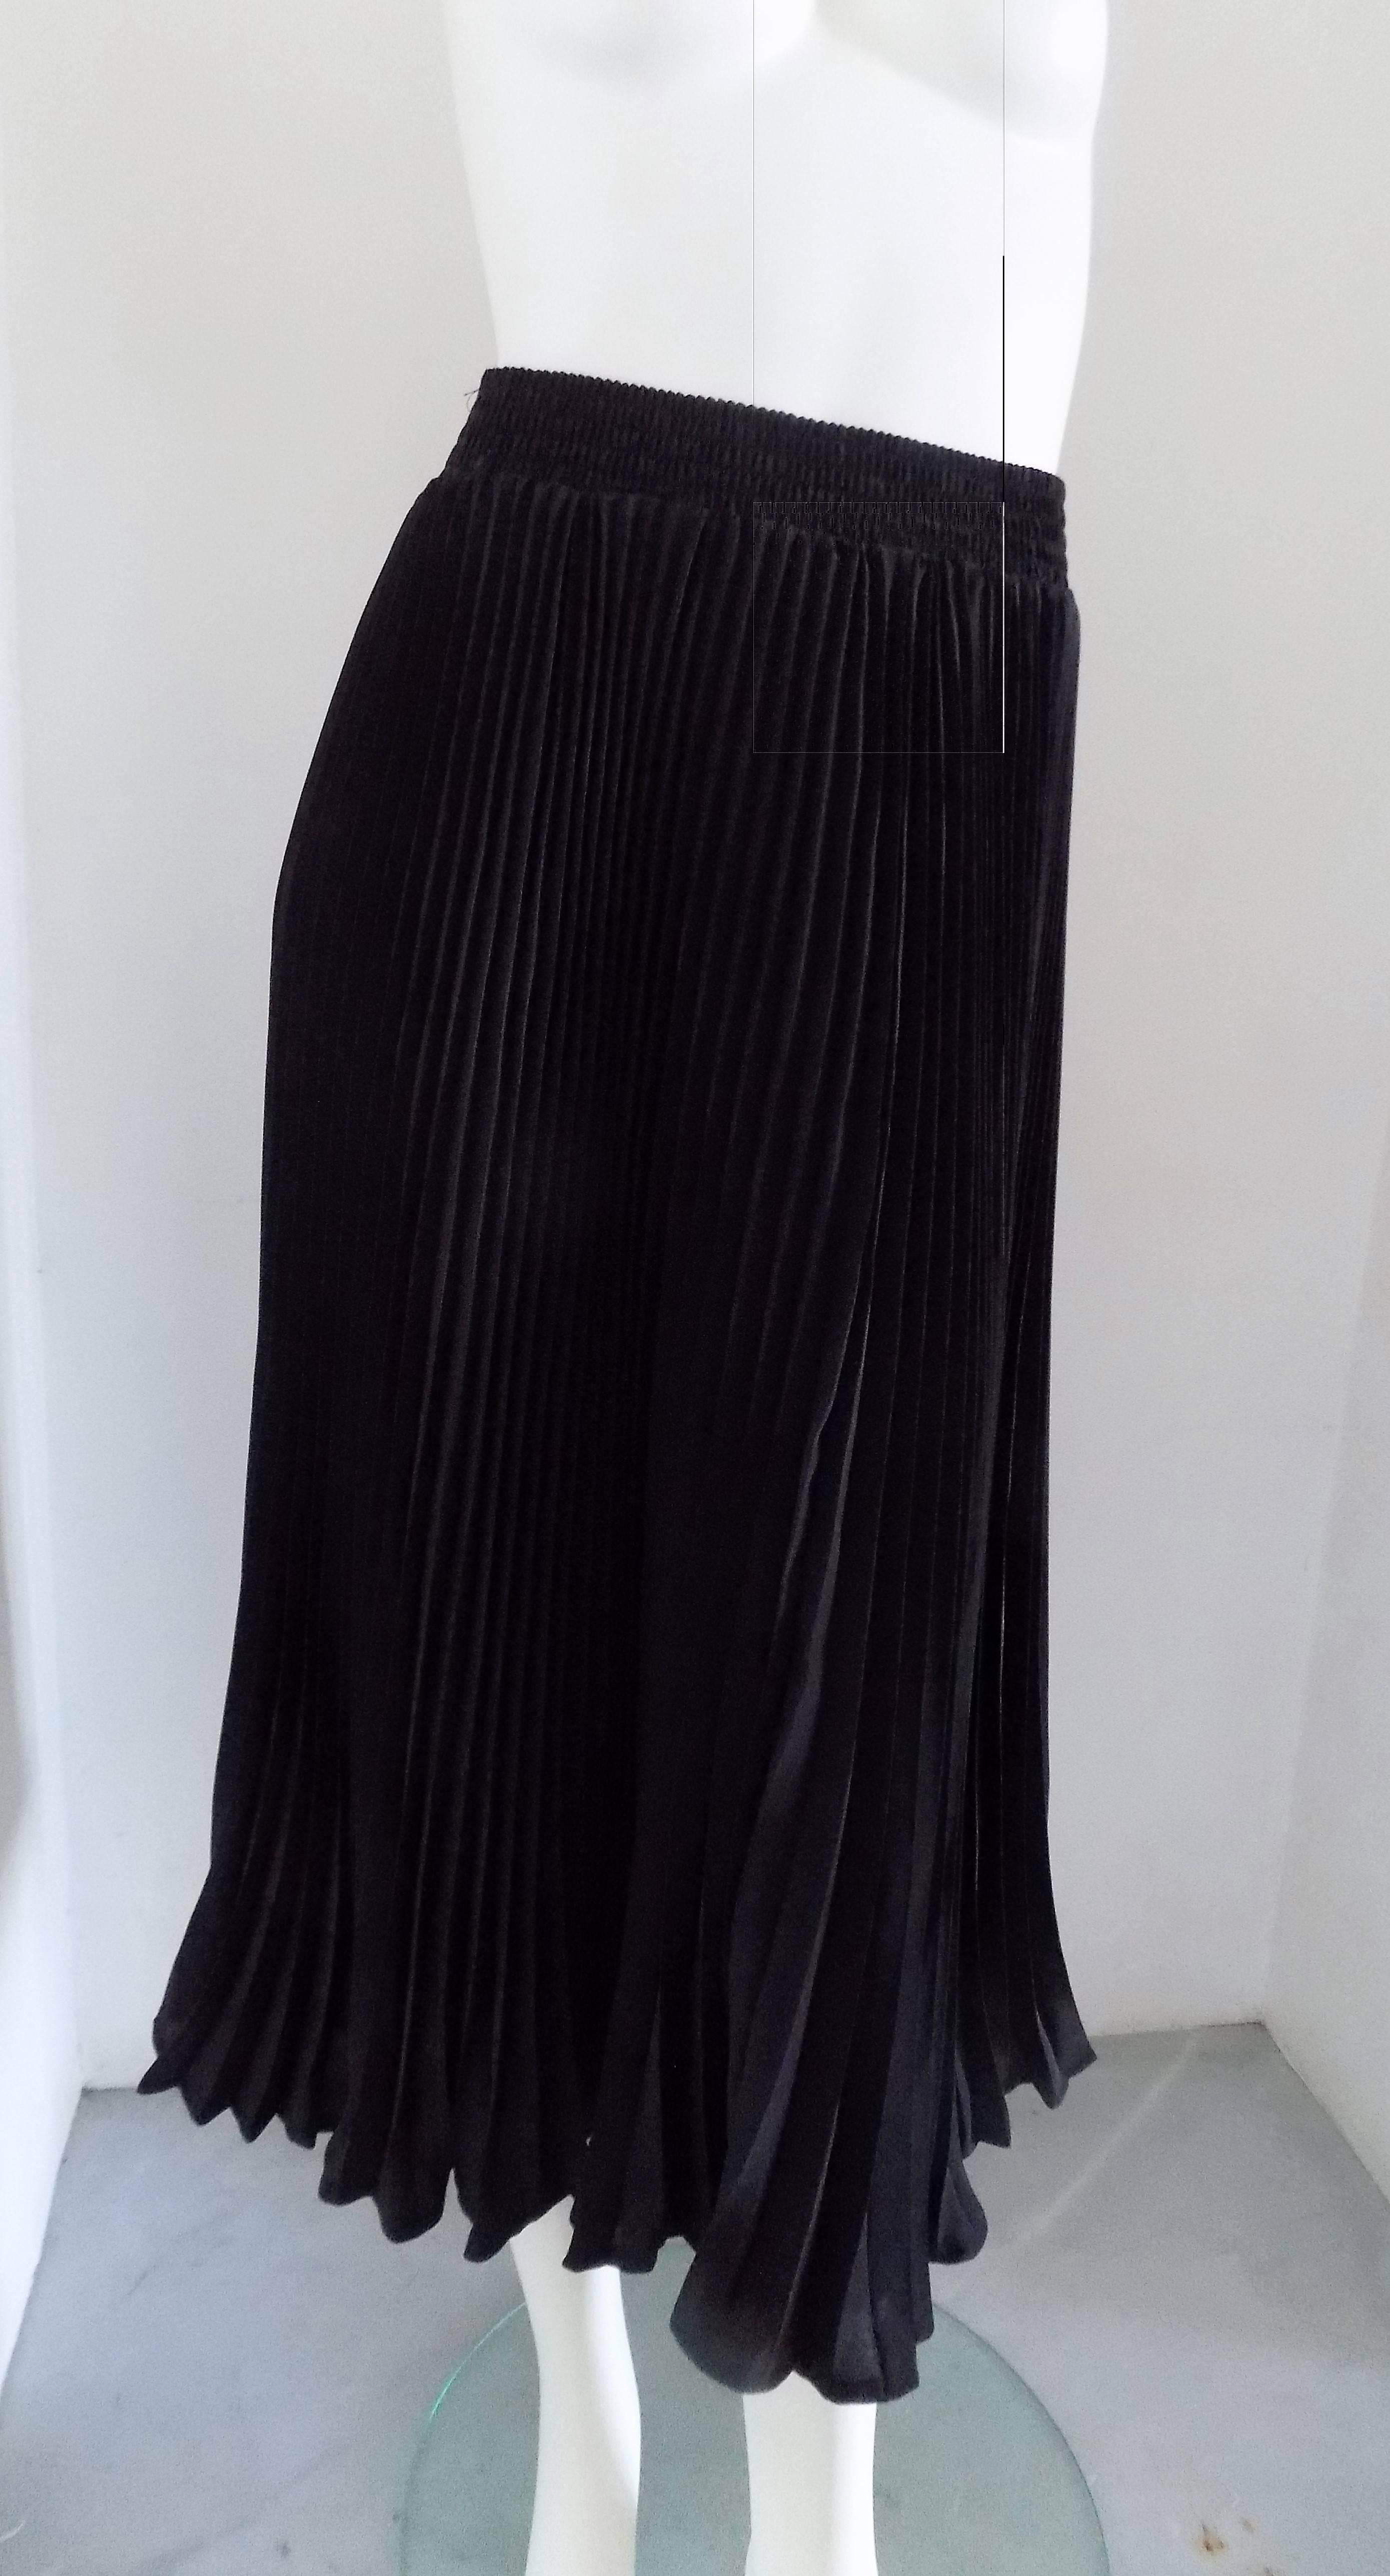 Long black Skirt totally made in italy
Composition: Polyester
Elastic Waist from 62 cm to 84 cm